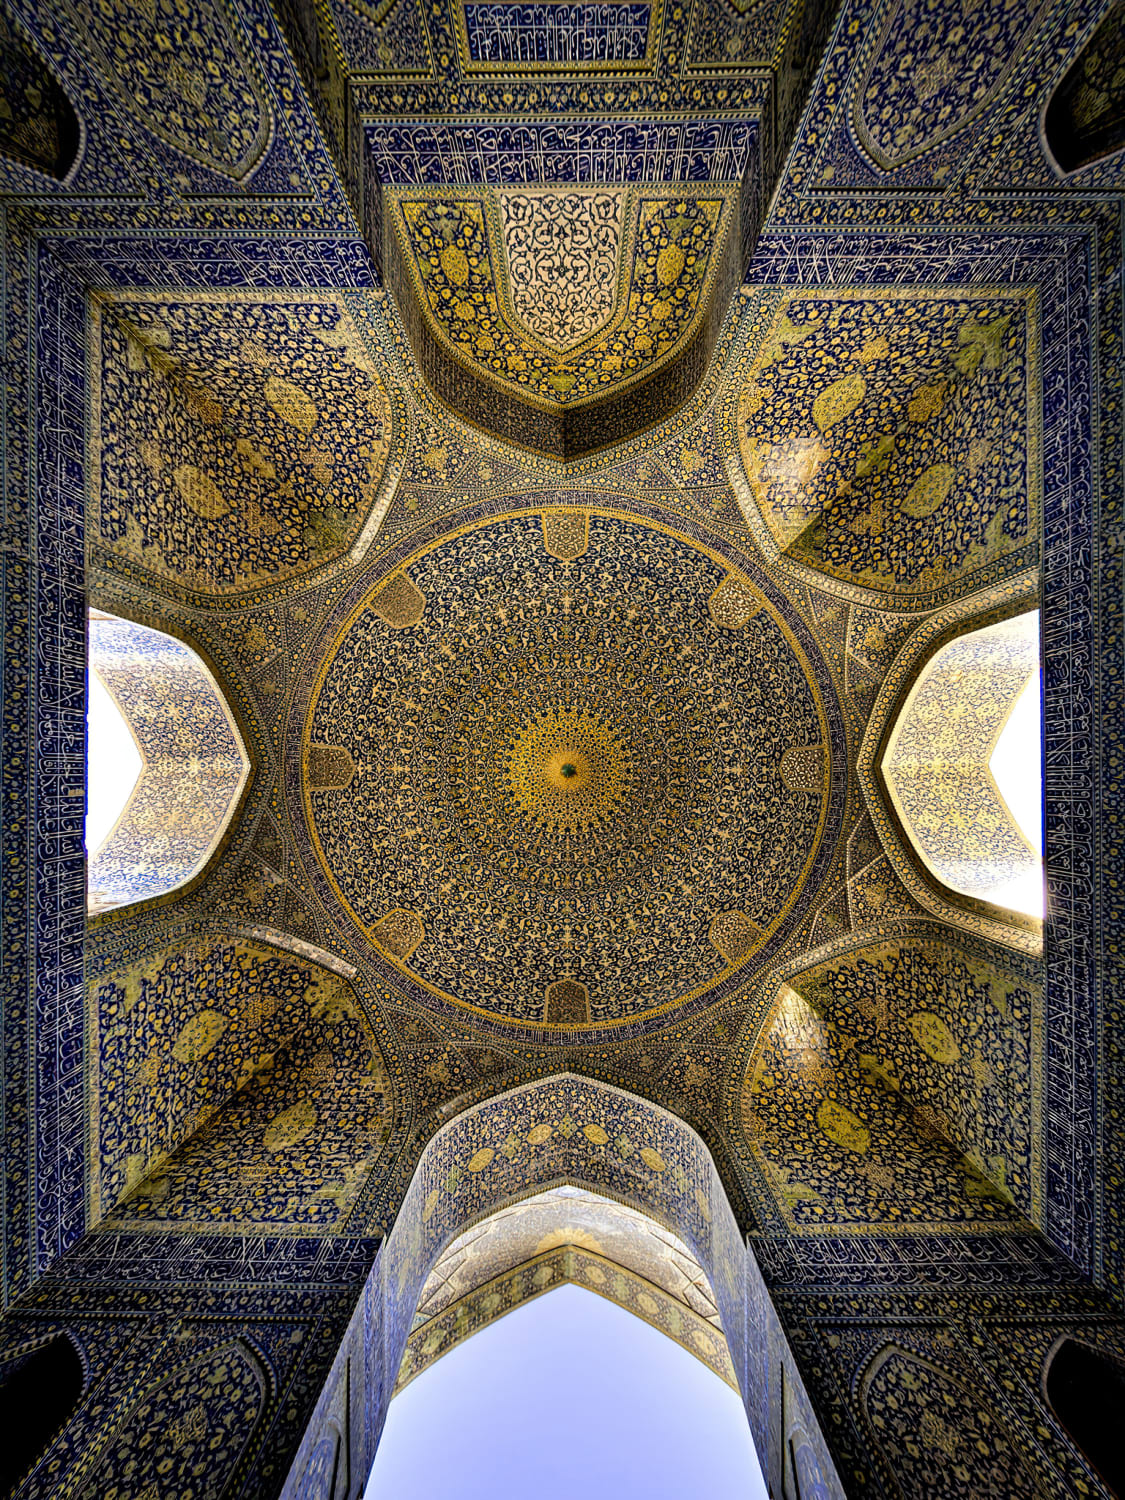 The ceiling of the Shah mosque in Isfahan, Iran.